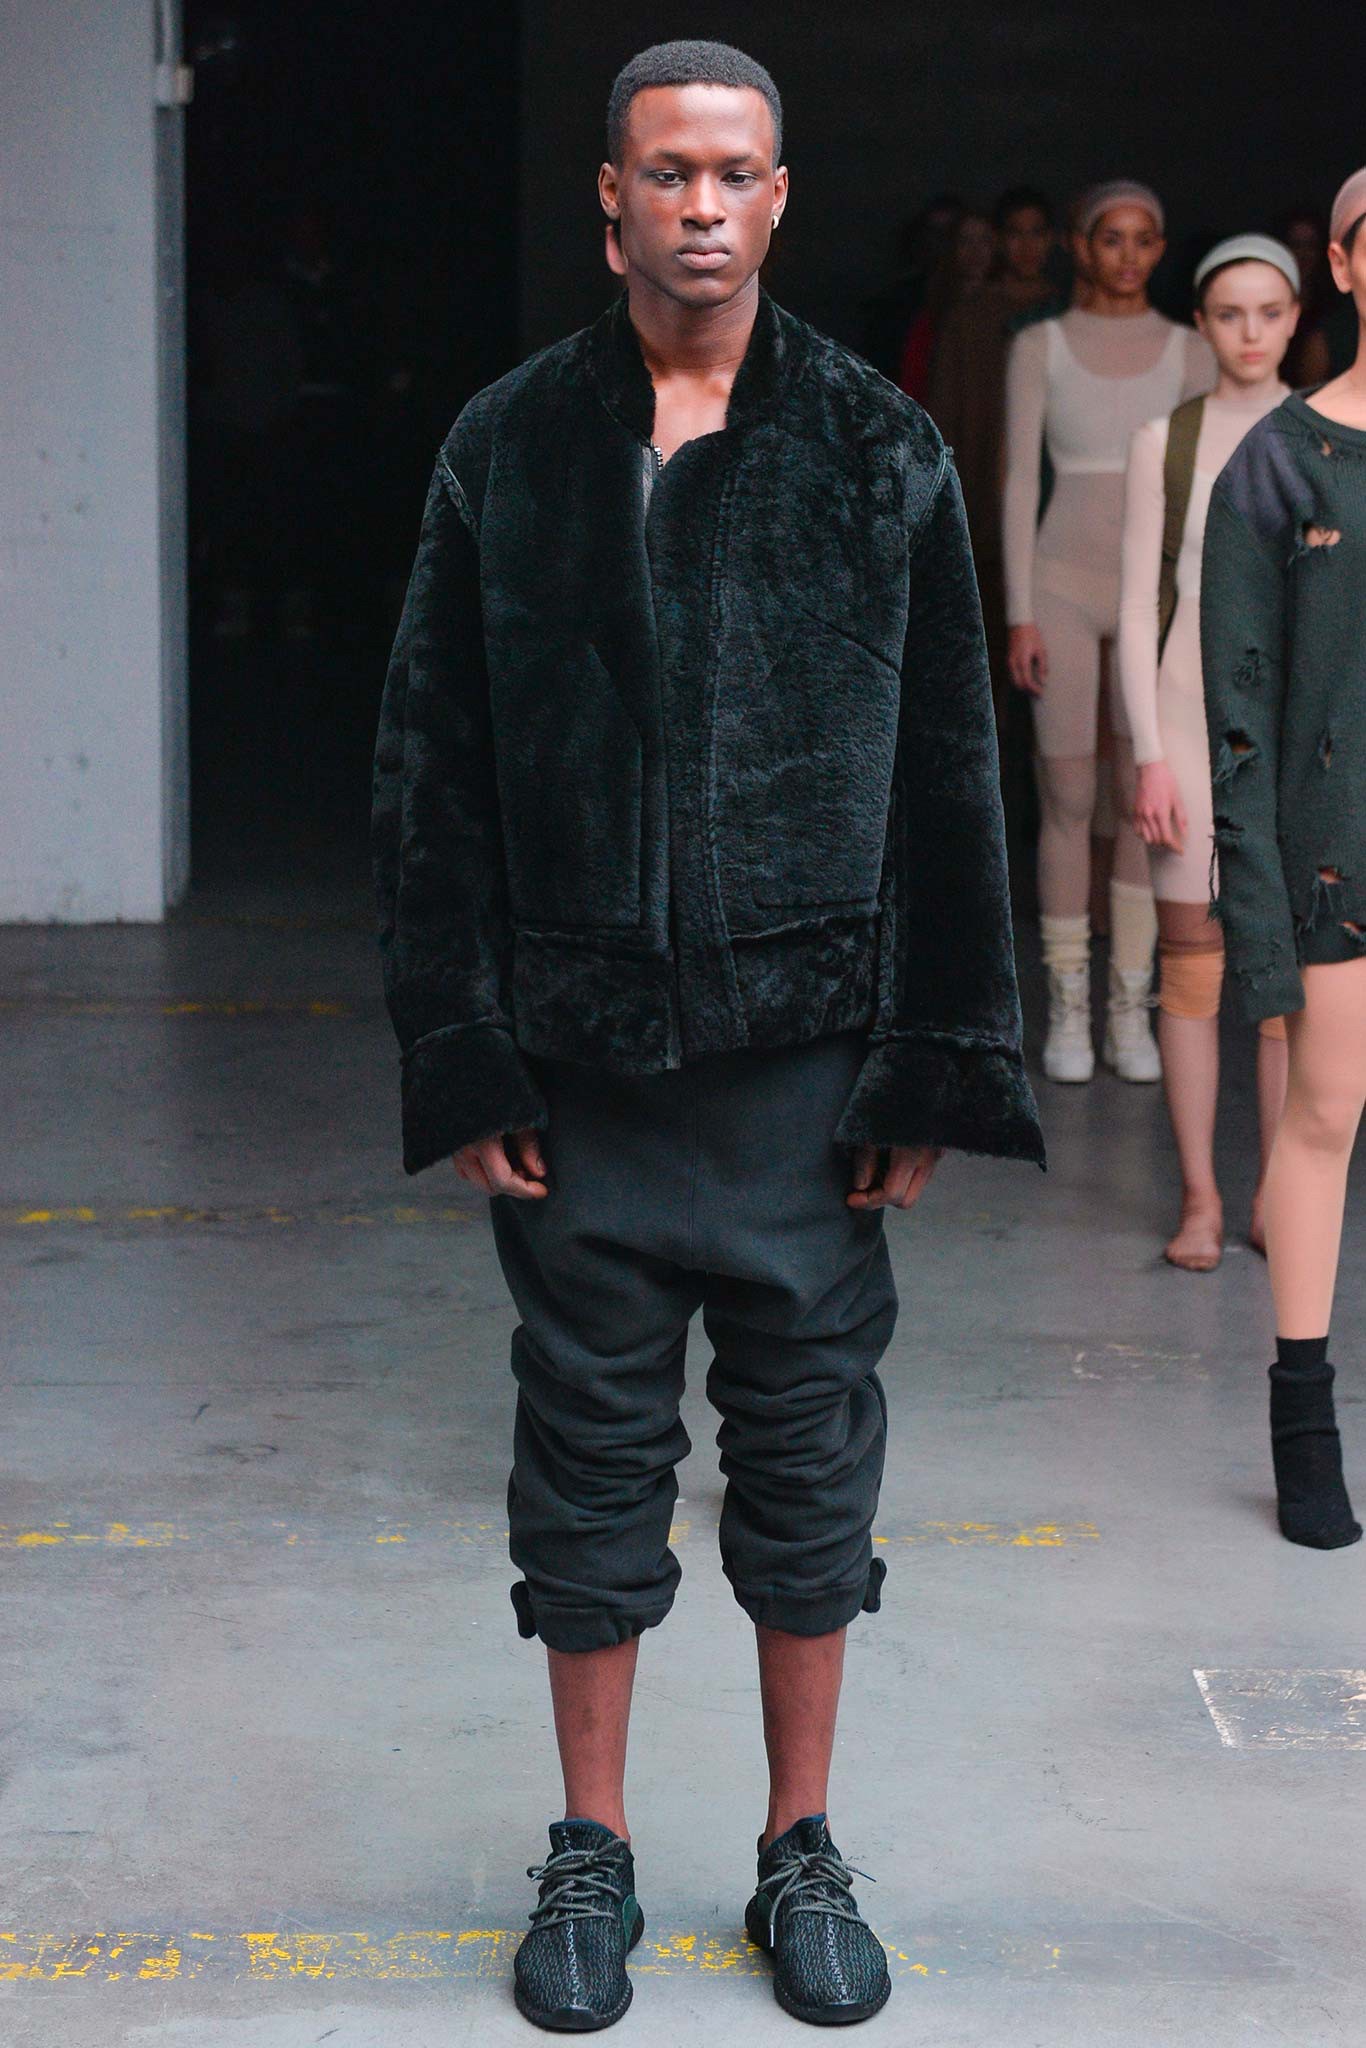 Kanye West for Adidas Fall/Winter 2015